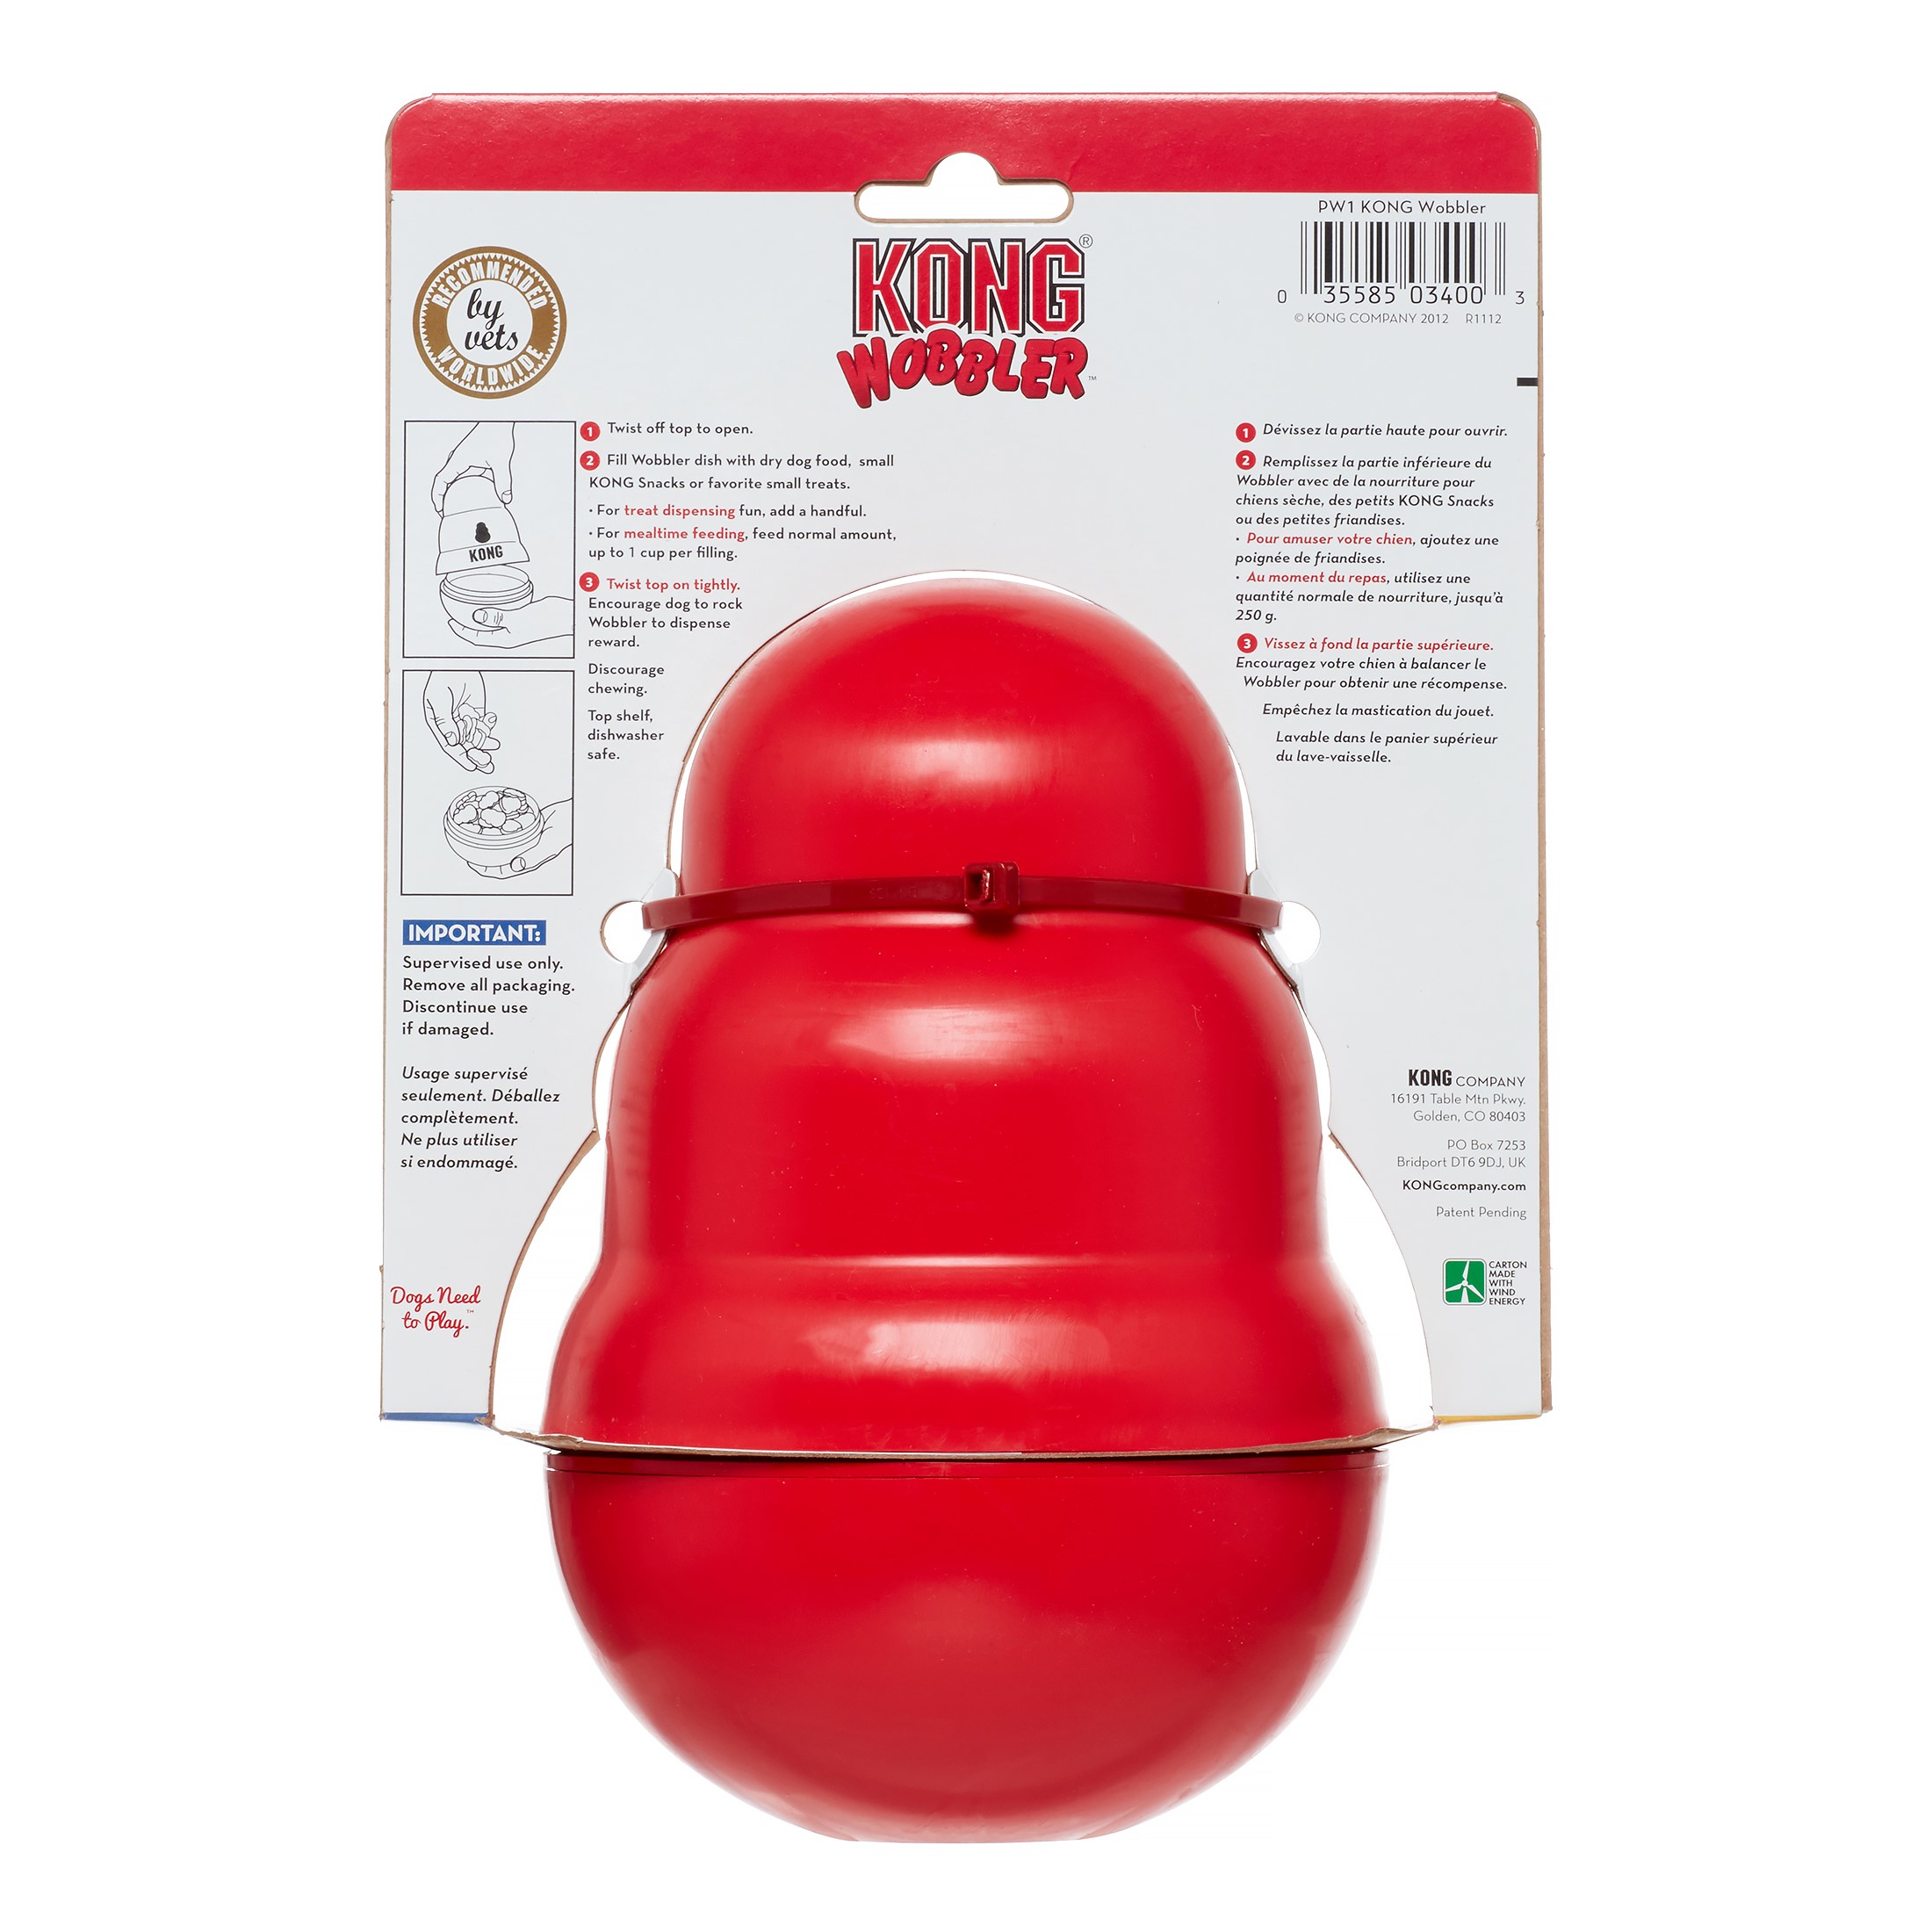 KONG Wobbler Food and Treat Dispenser Dog Toy Red - image 2 of 2